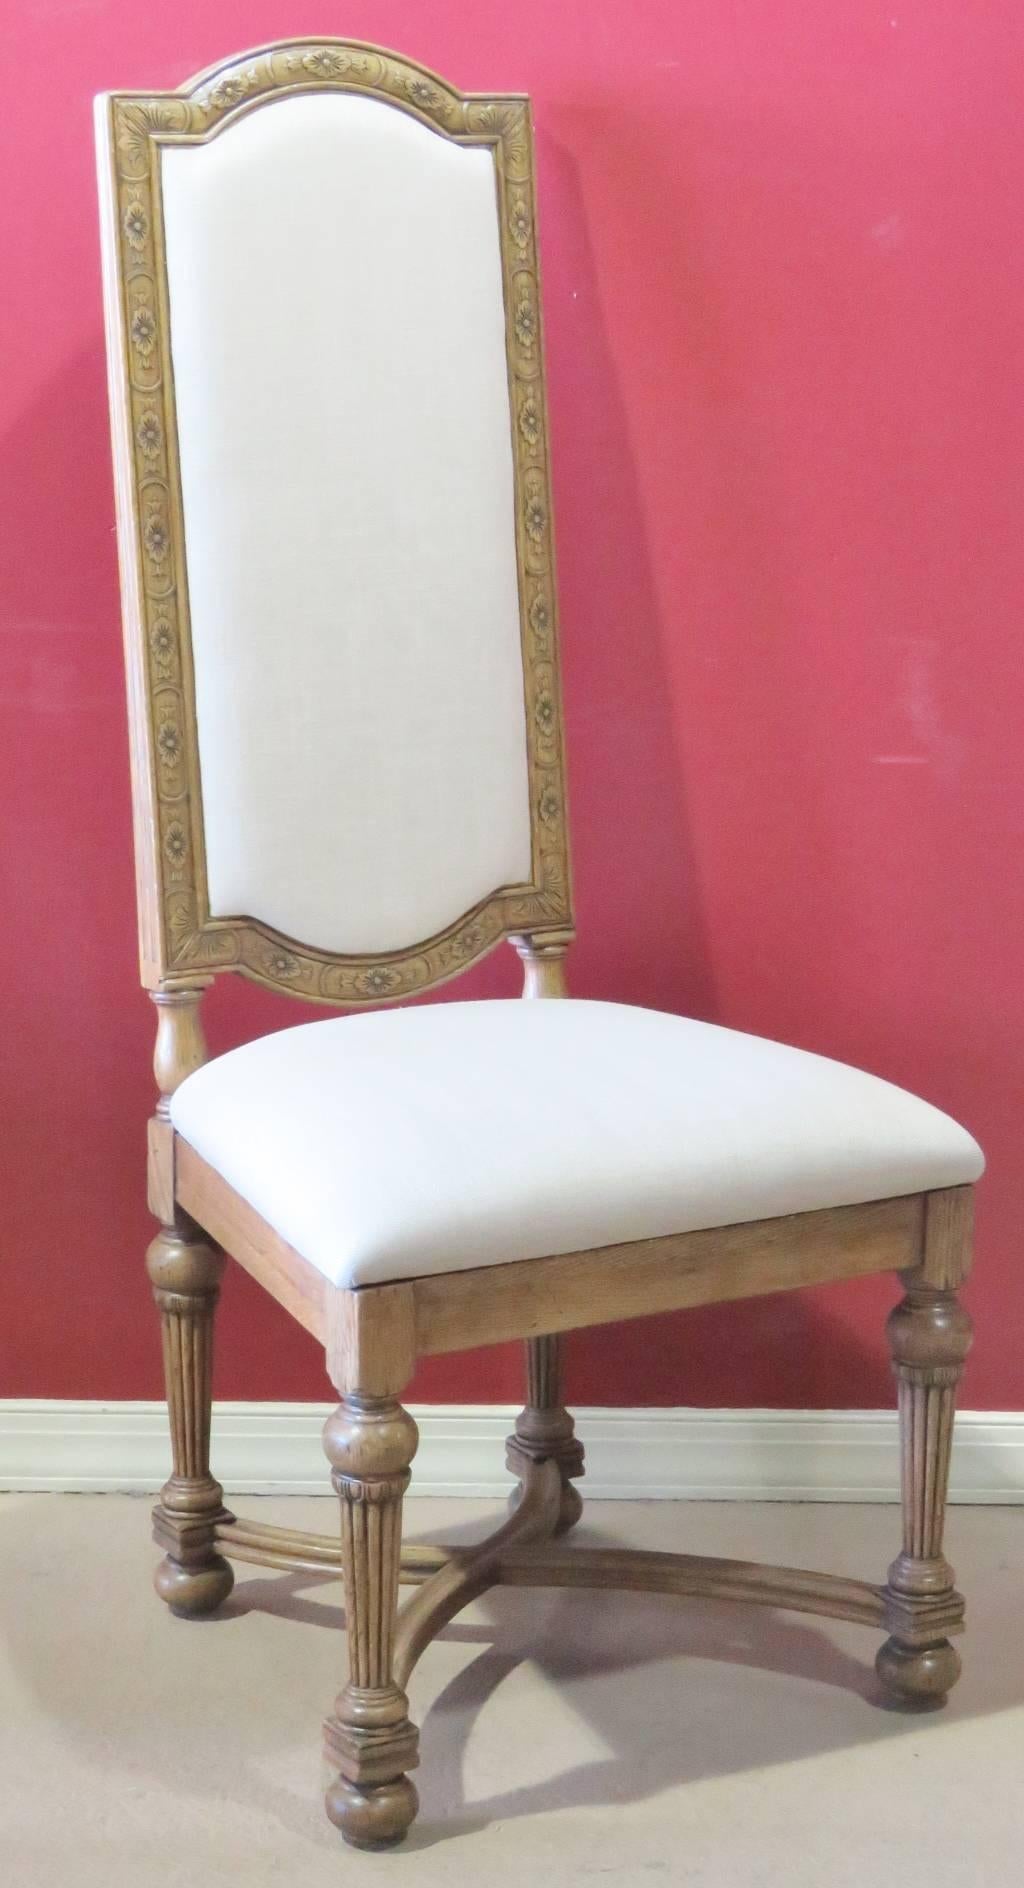 These are a great set of eight Jonathan Charles dining chairs. Chairs have a carved frame with cream upholstered backs and seats. These are the perfect dining chairs to finish off any room in your home.